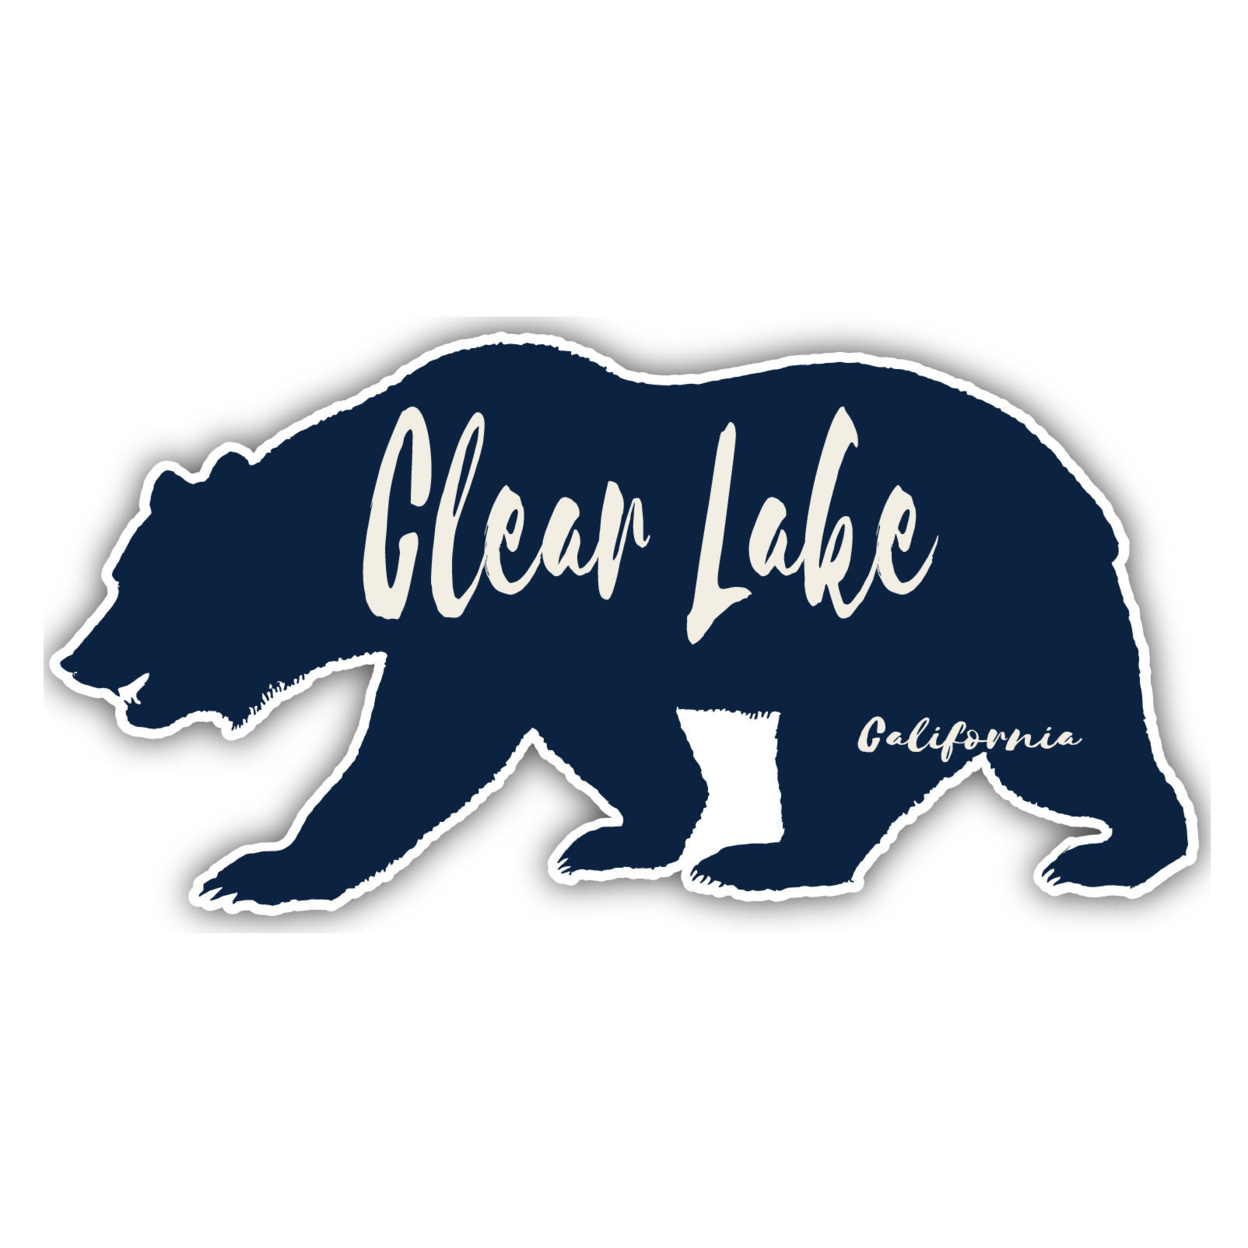 Clear Lake California Souvenir Decorative Stickers (Choose Theme And Size) - 4-Pack, 12-Inch, Bear